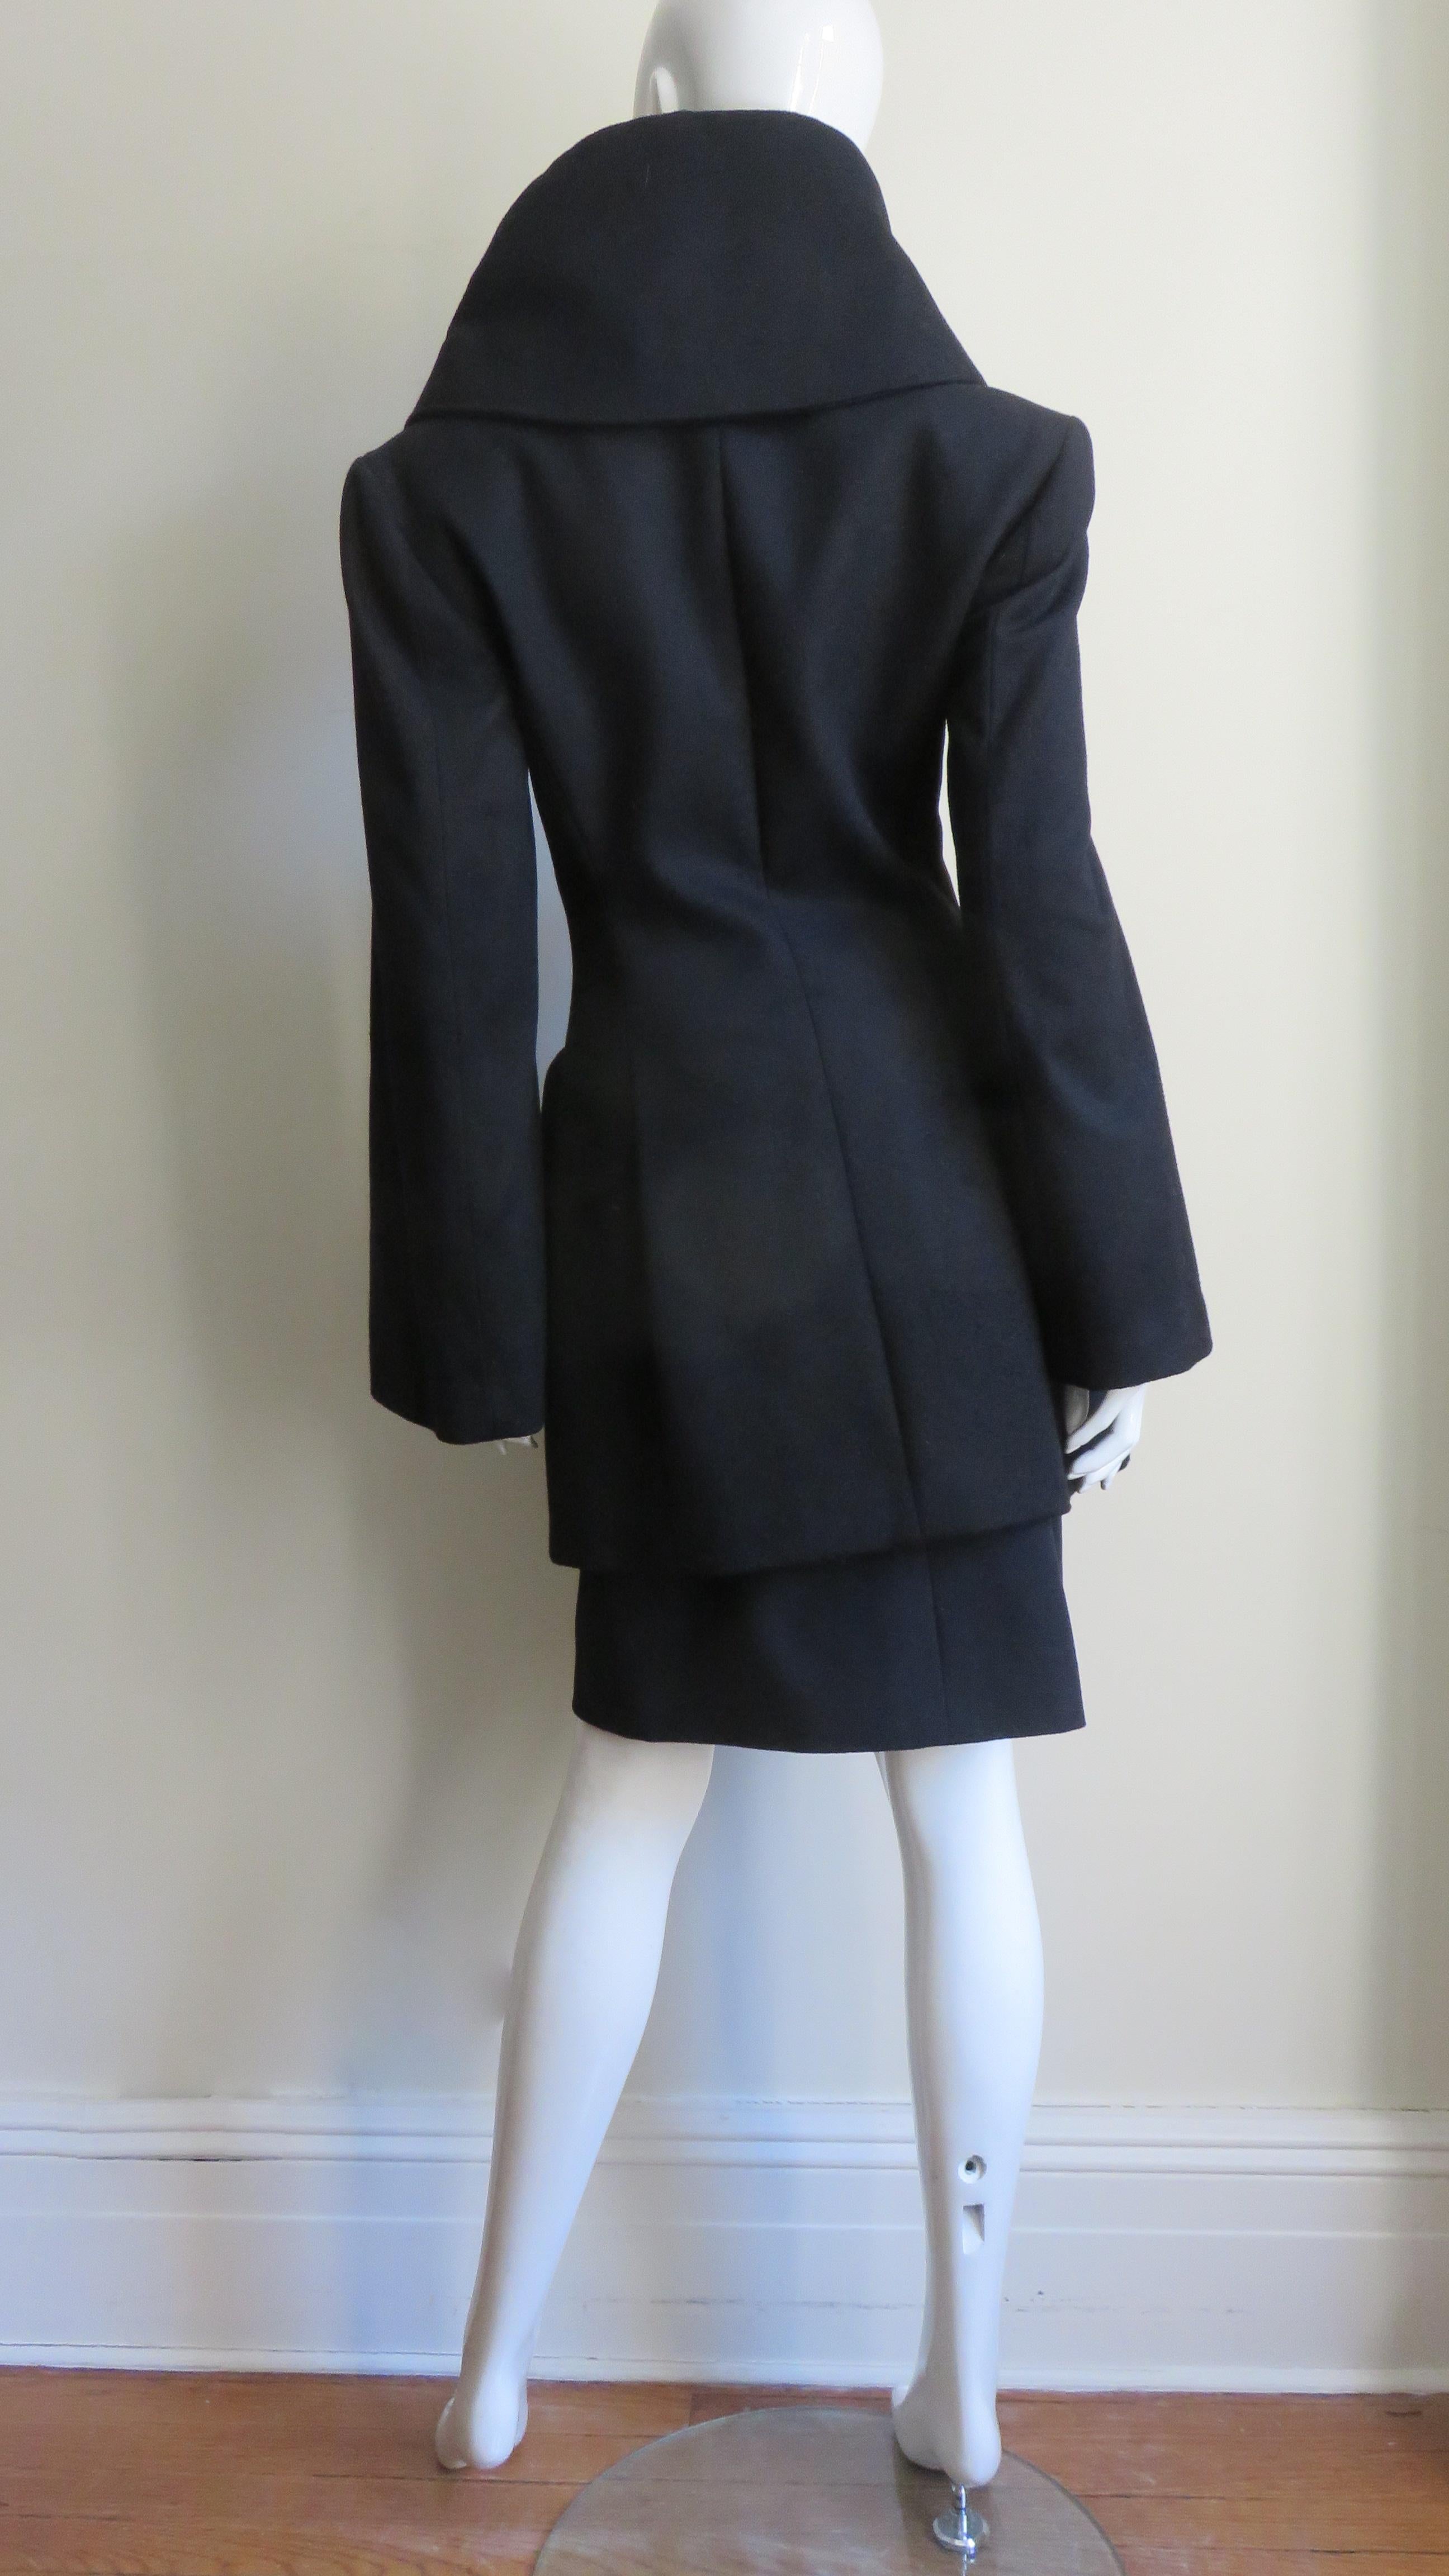 Alexander McQueen New Cashmere Popped Lapel Collar Jacket and Skirt A/W 1999 For Sale 3